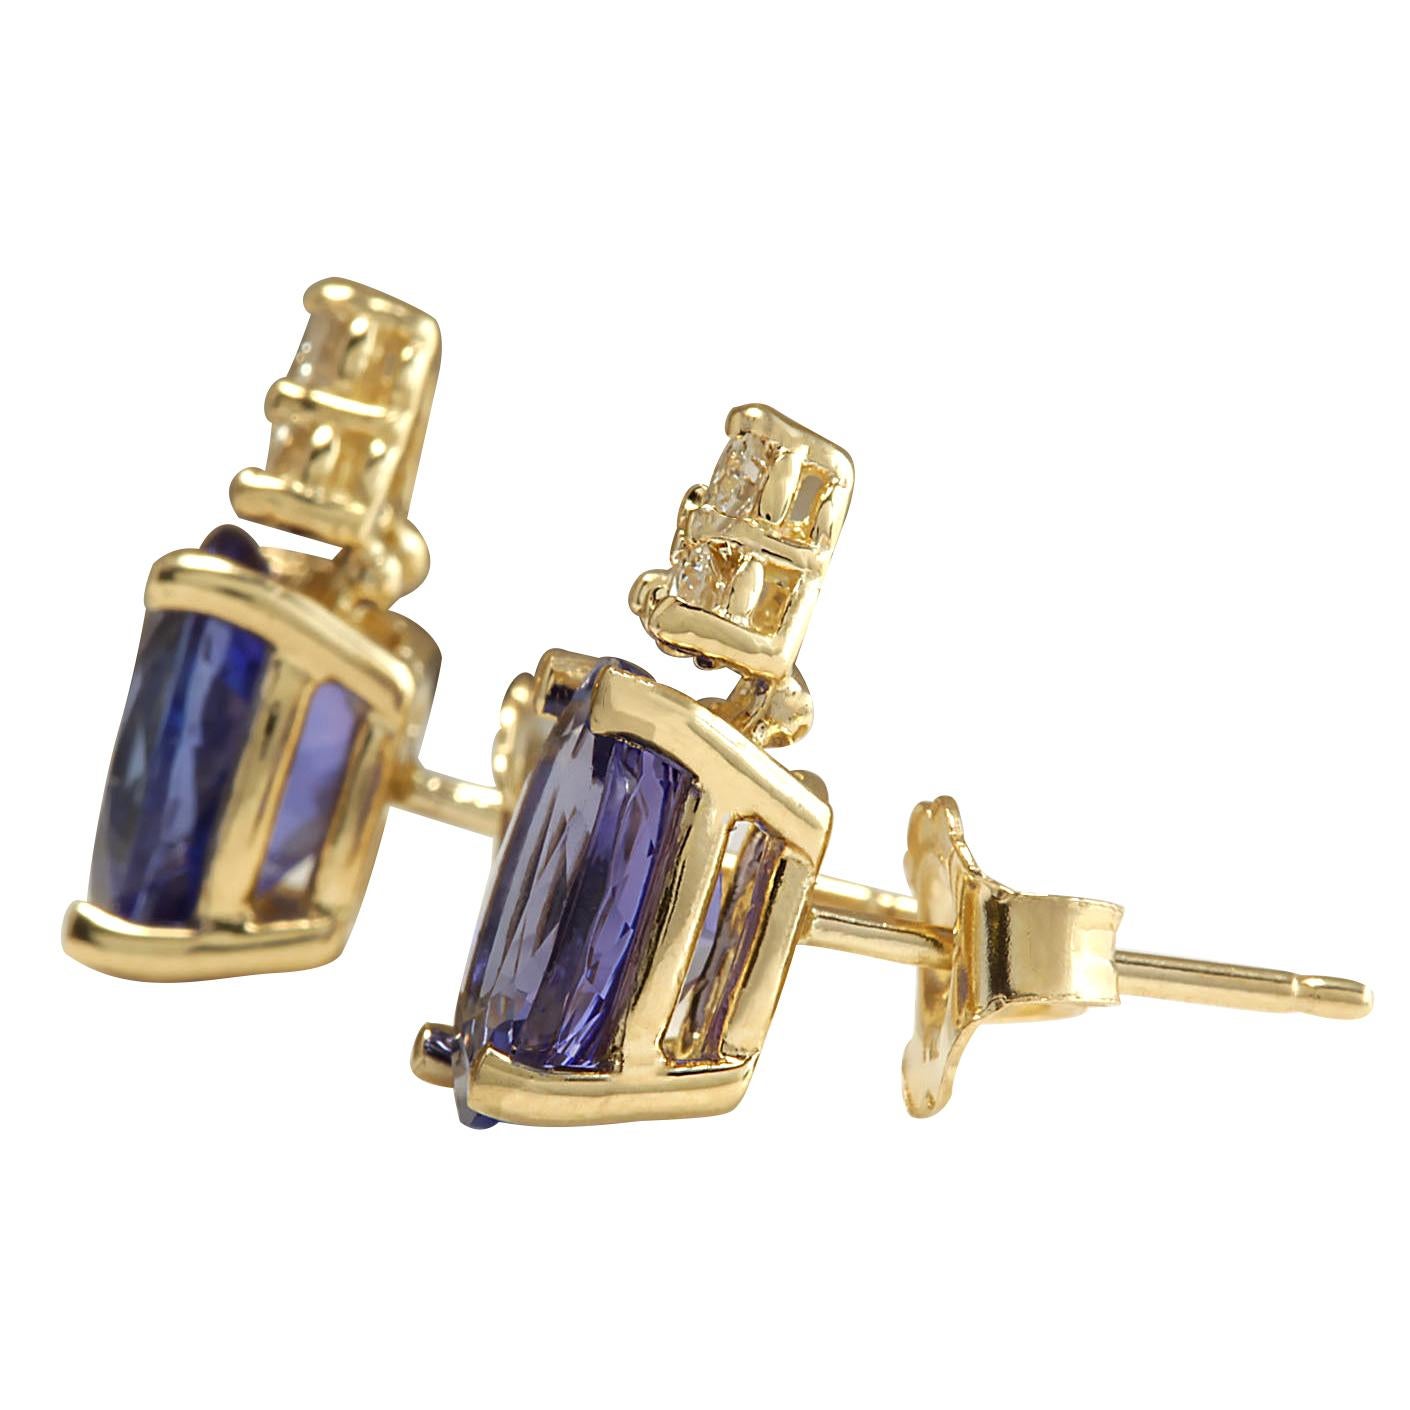 2.79 Carat Natural Tanzanite 14 Karat Yellow Gold Diamond Earrings
Stamped: 14K Yellow Gold
Total Earrings Weight: 2.5 Grams
Total Natural Tanzanite Weight is 2.59 Carat (Measures: 8.00x6.00 mm)
Color: Blue
Total Natural Diamond Weight is 0.20